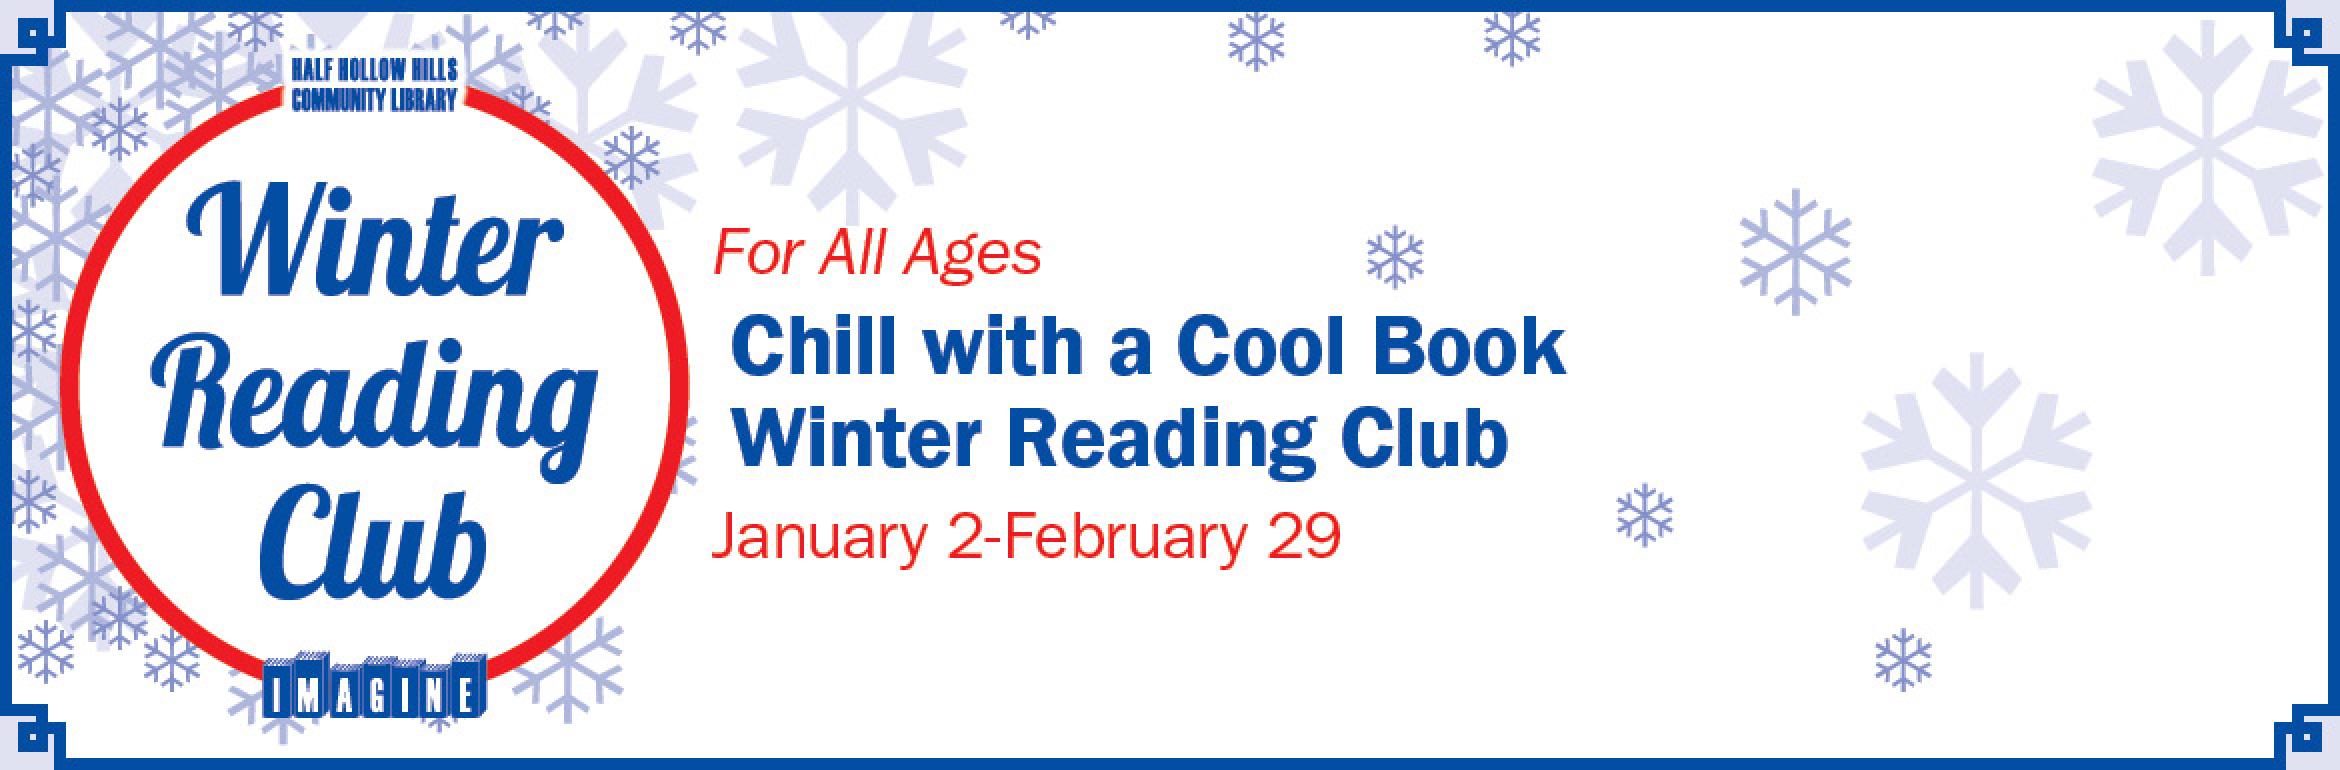 Winter Reading Club. For All Ages. Chill with a Cool Book Winter Reading Club. January 2-February 29.